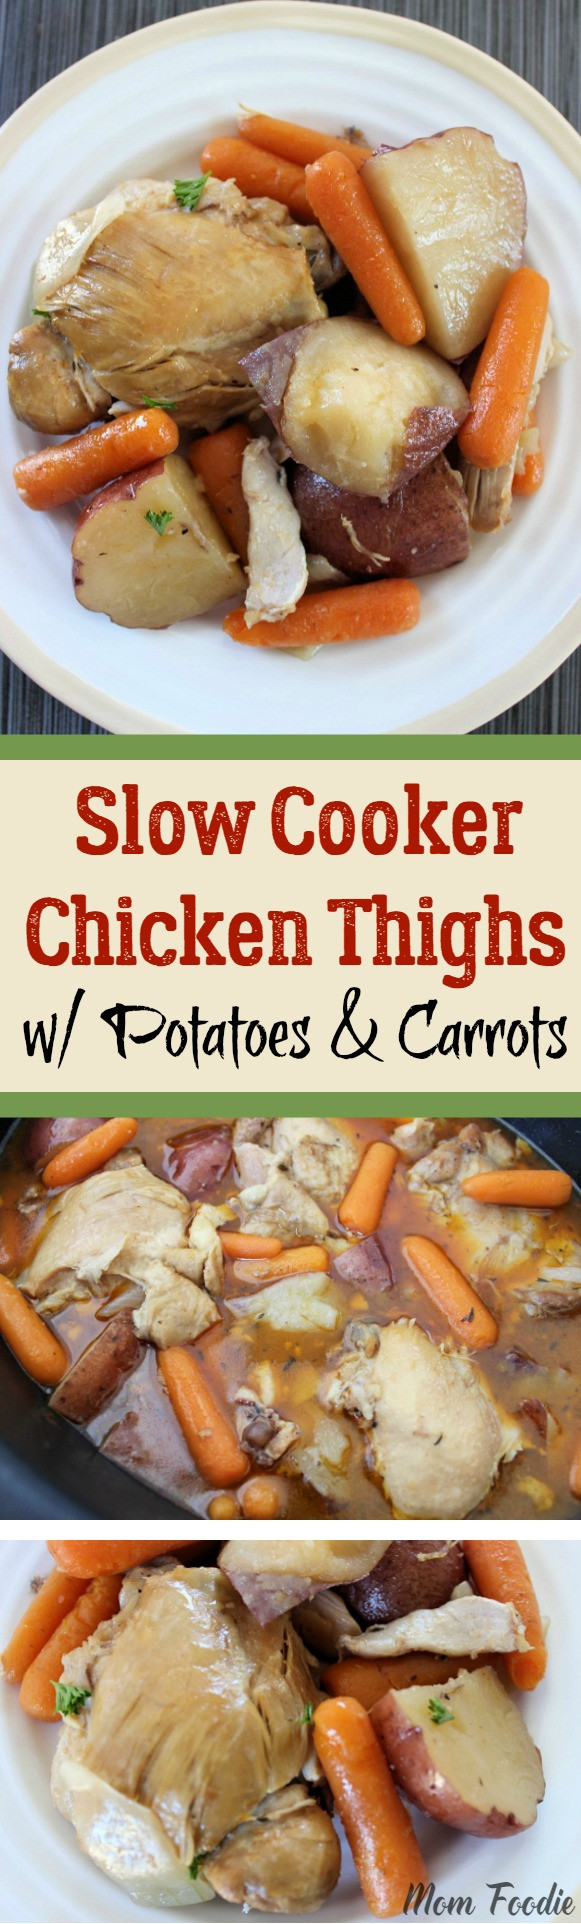 Slow Cook Chicken Thighs
 Slow Cooker Chicken Thighs with Potatoes and Carrots Mom